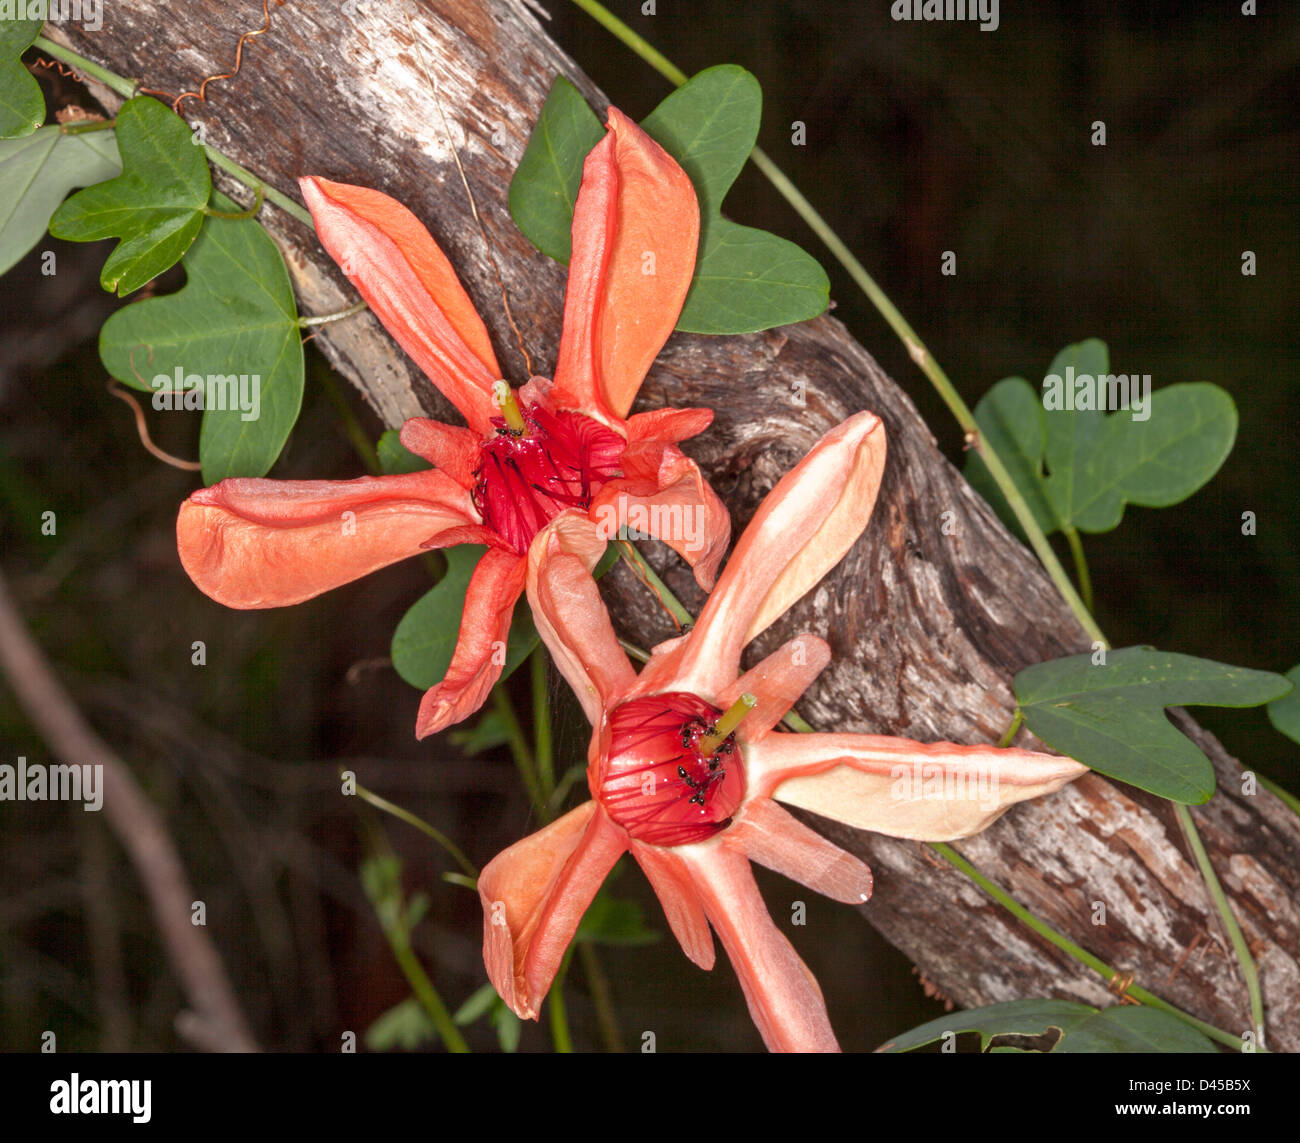 Two spectacular salmon red flowers and foliage of Passiflora aurantia - Australian native passionflower - climbing on tree trunk Stock Photo